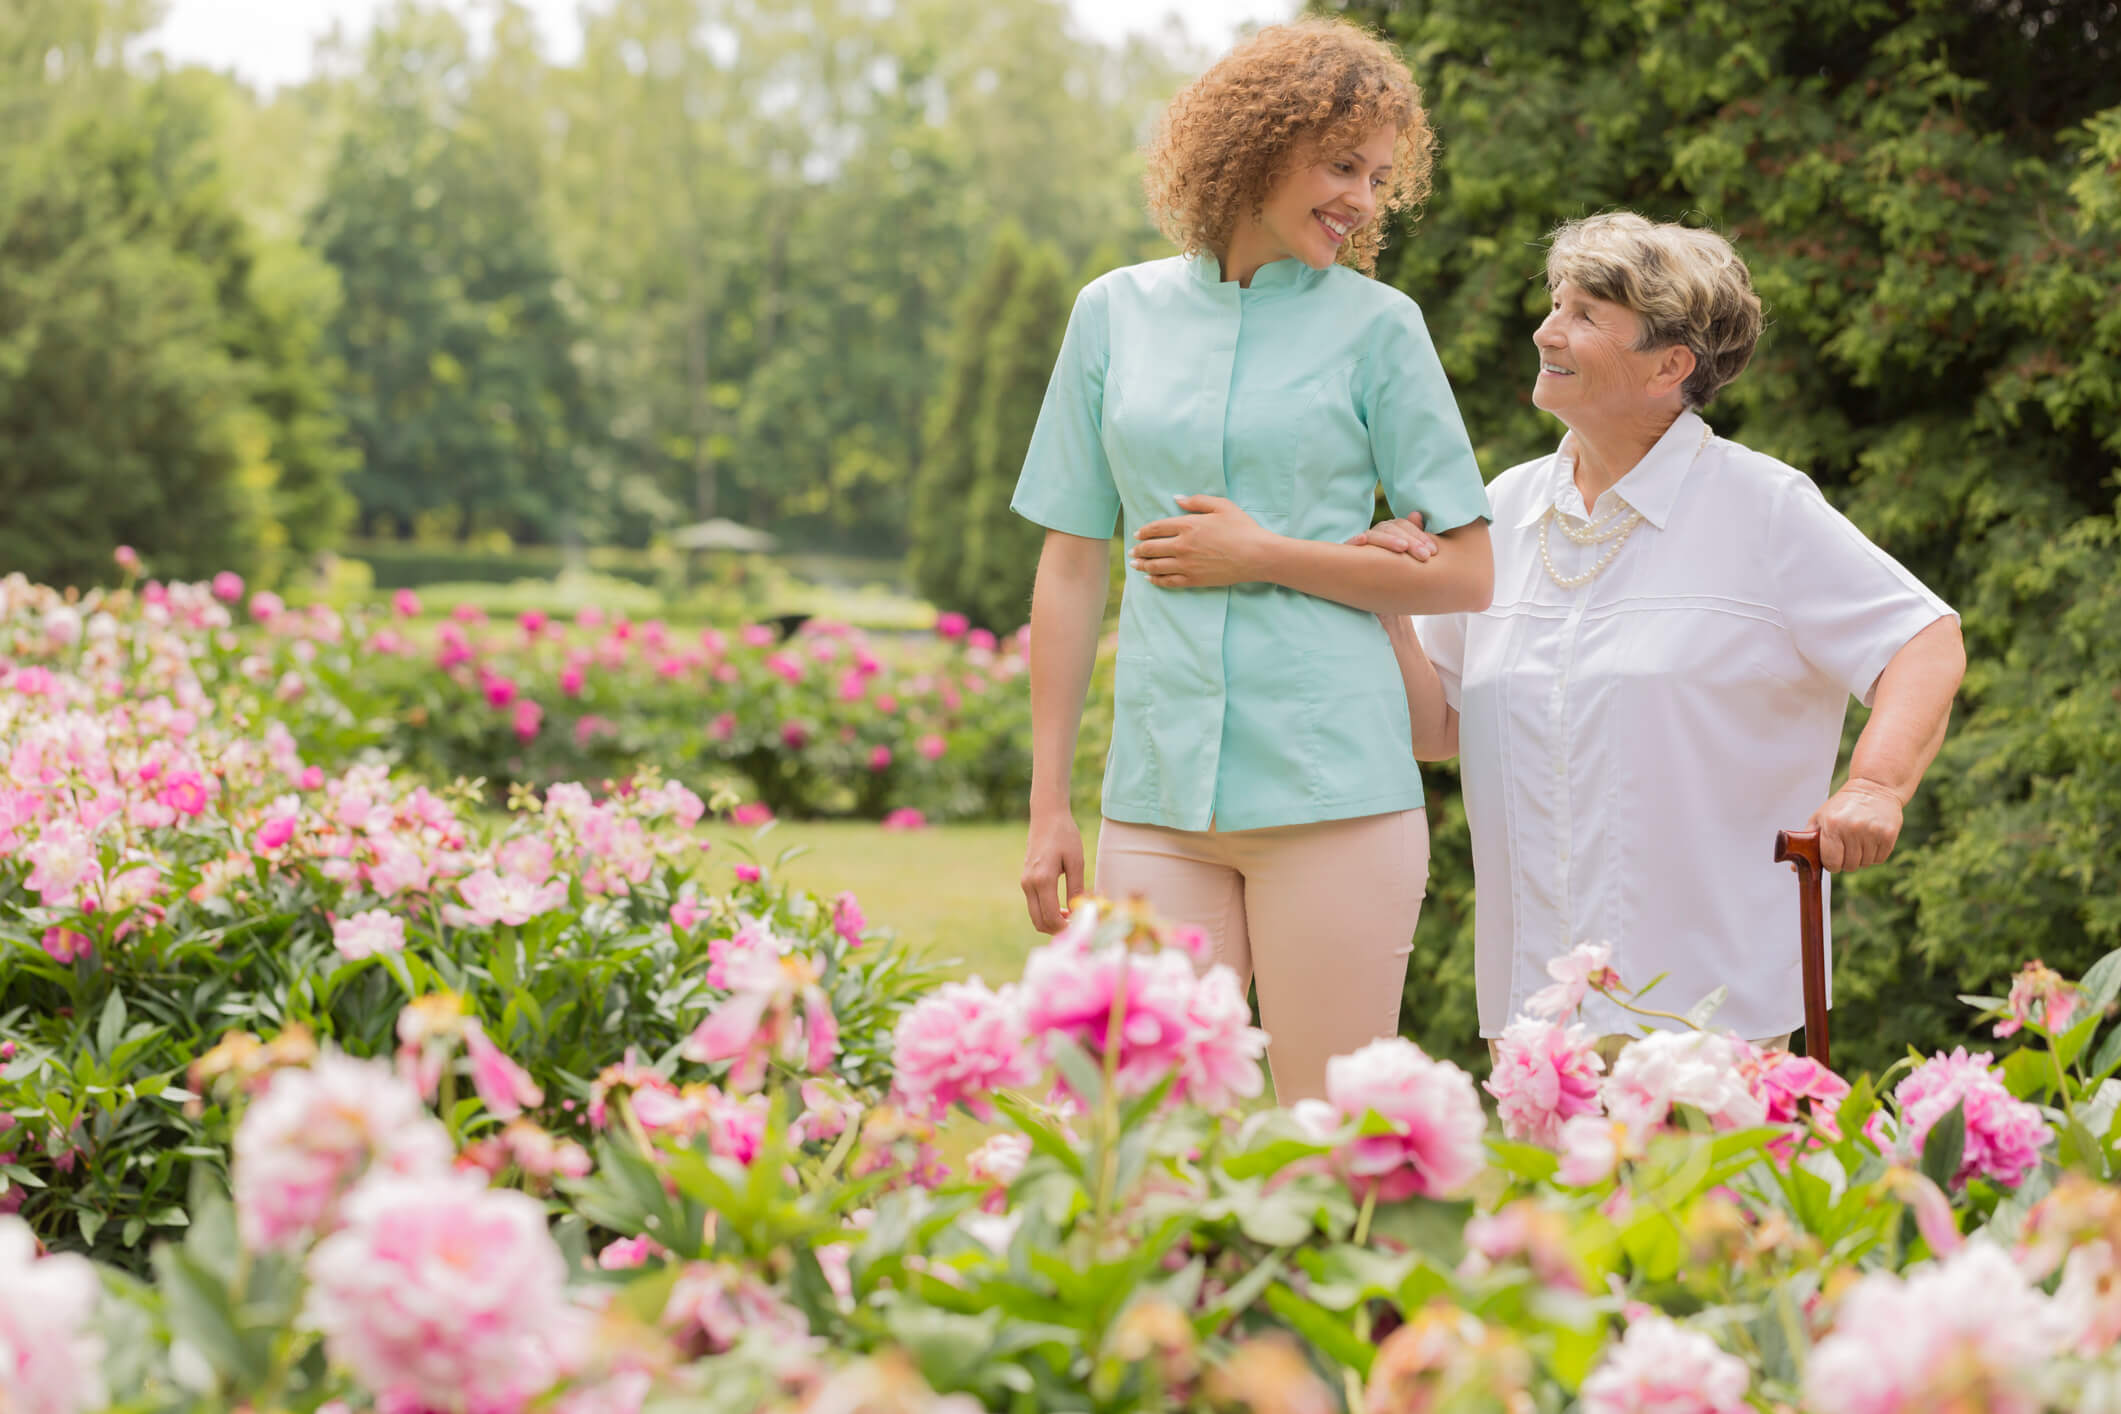 Moving to Assisted Living? Here's How You Can Prepare